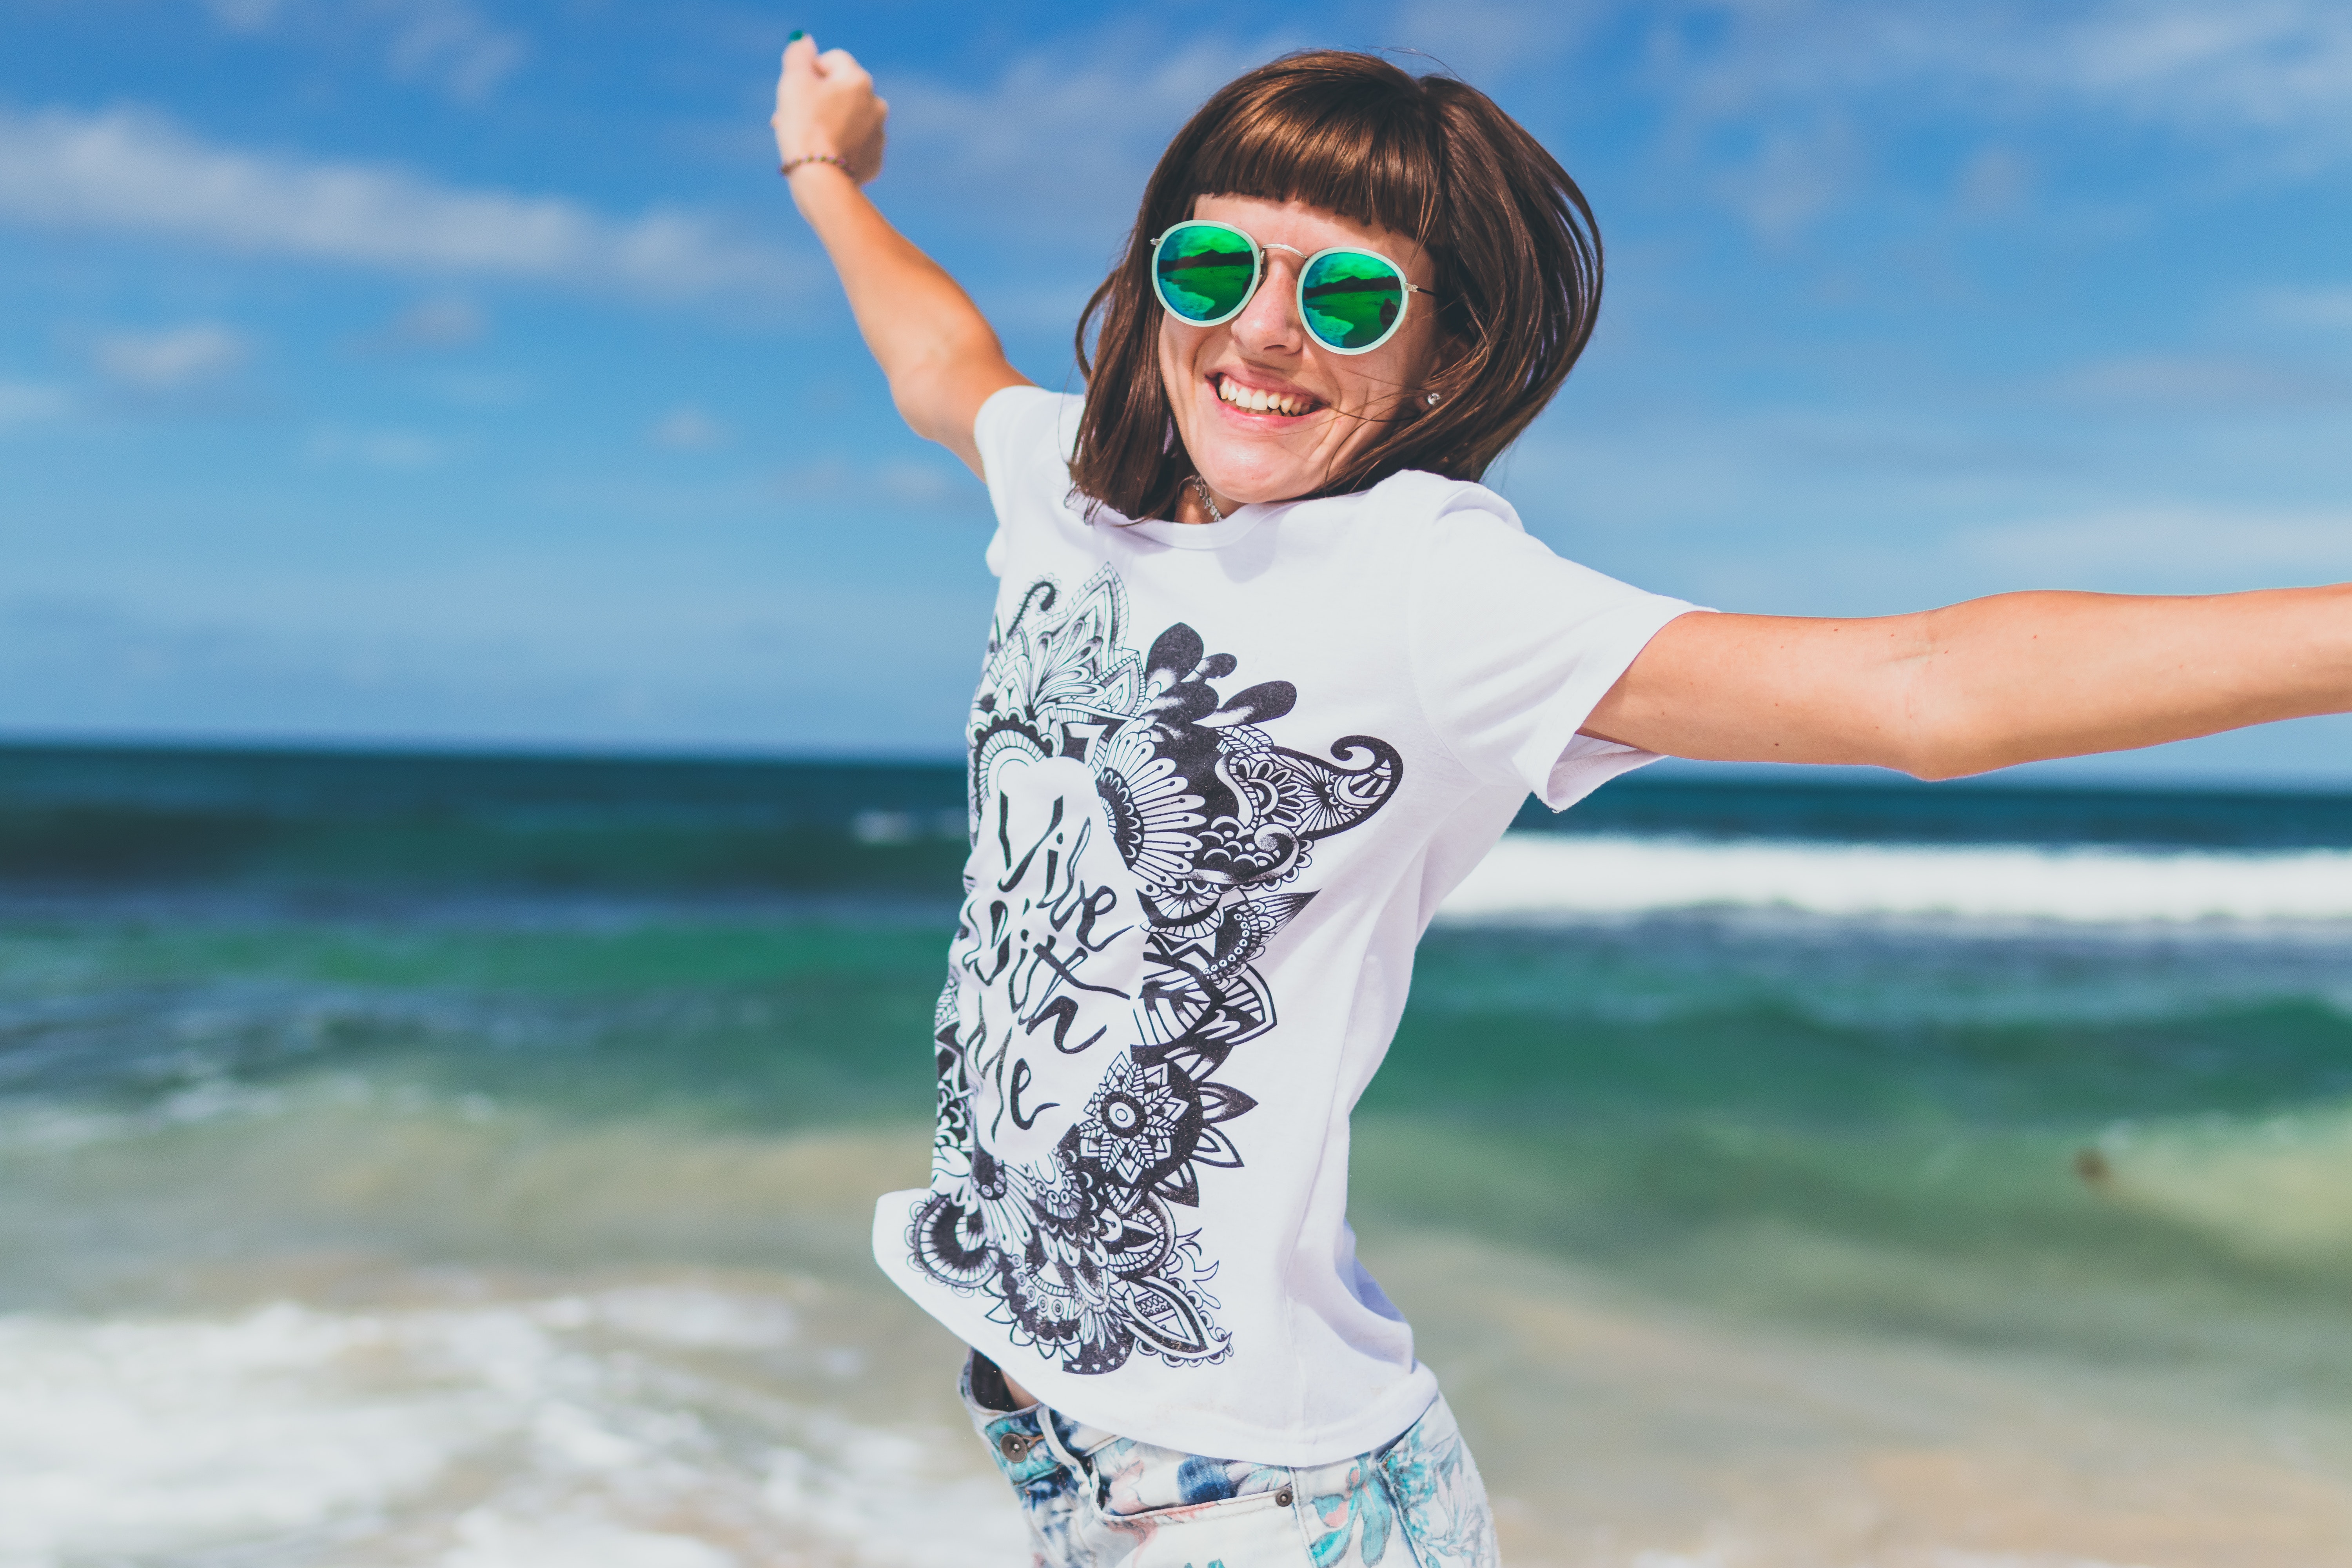 Woman in white and black t-shirt lifting hands smiling on seashore photo